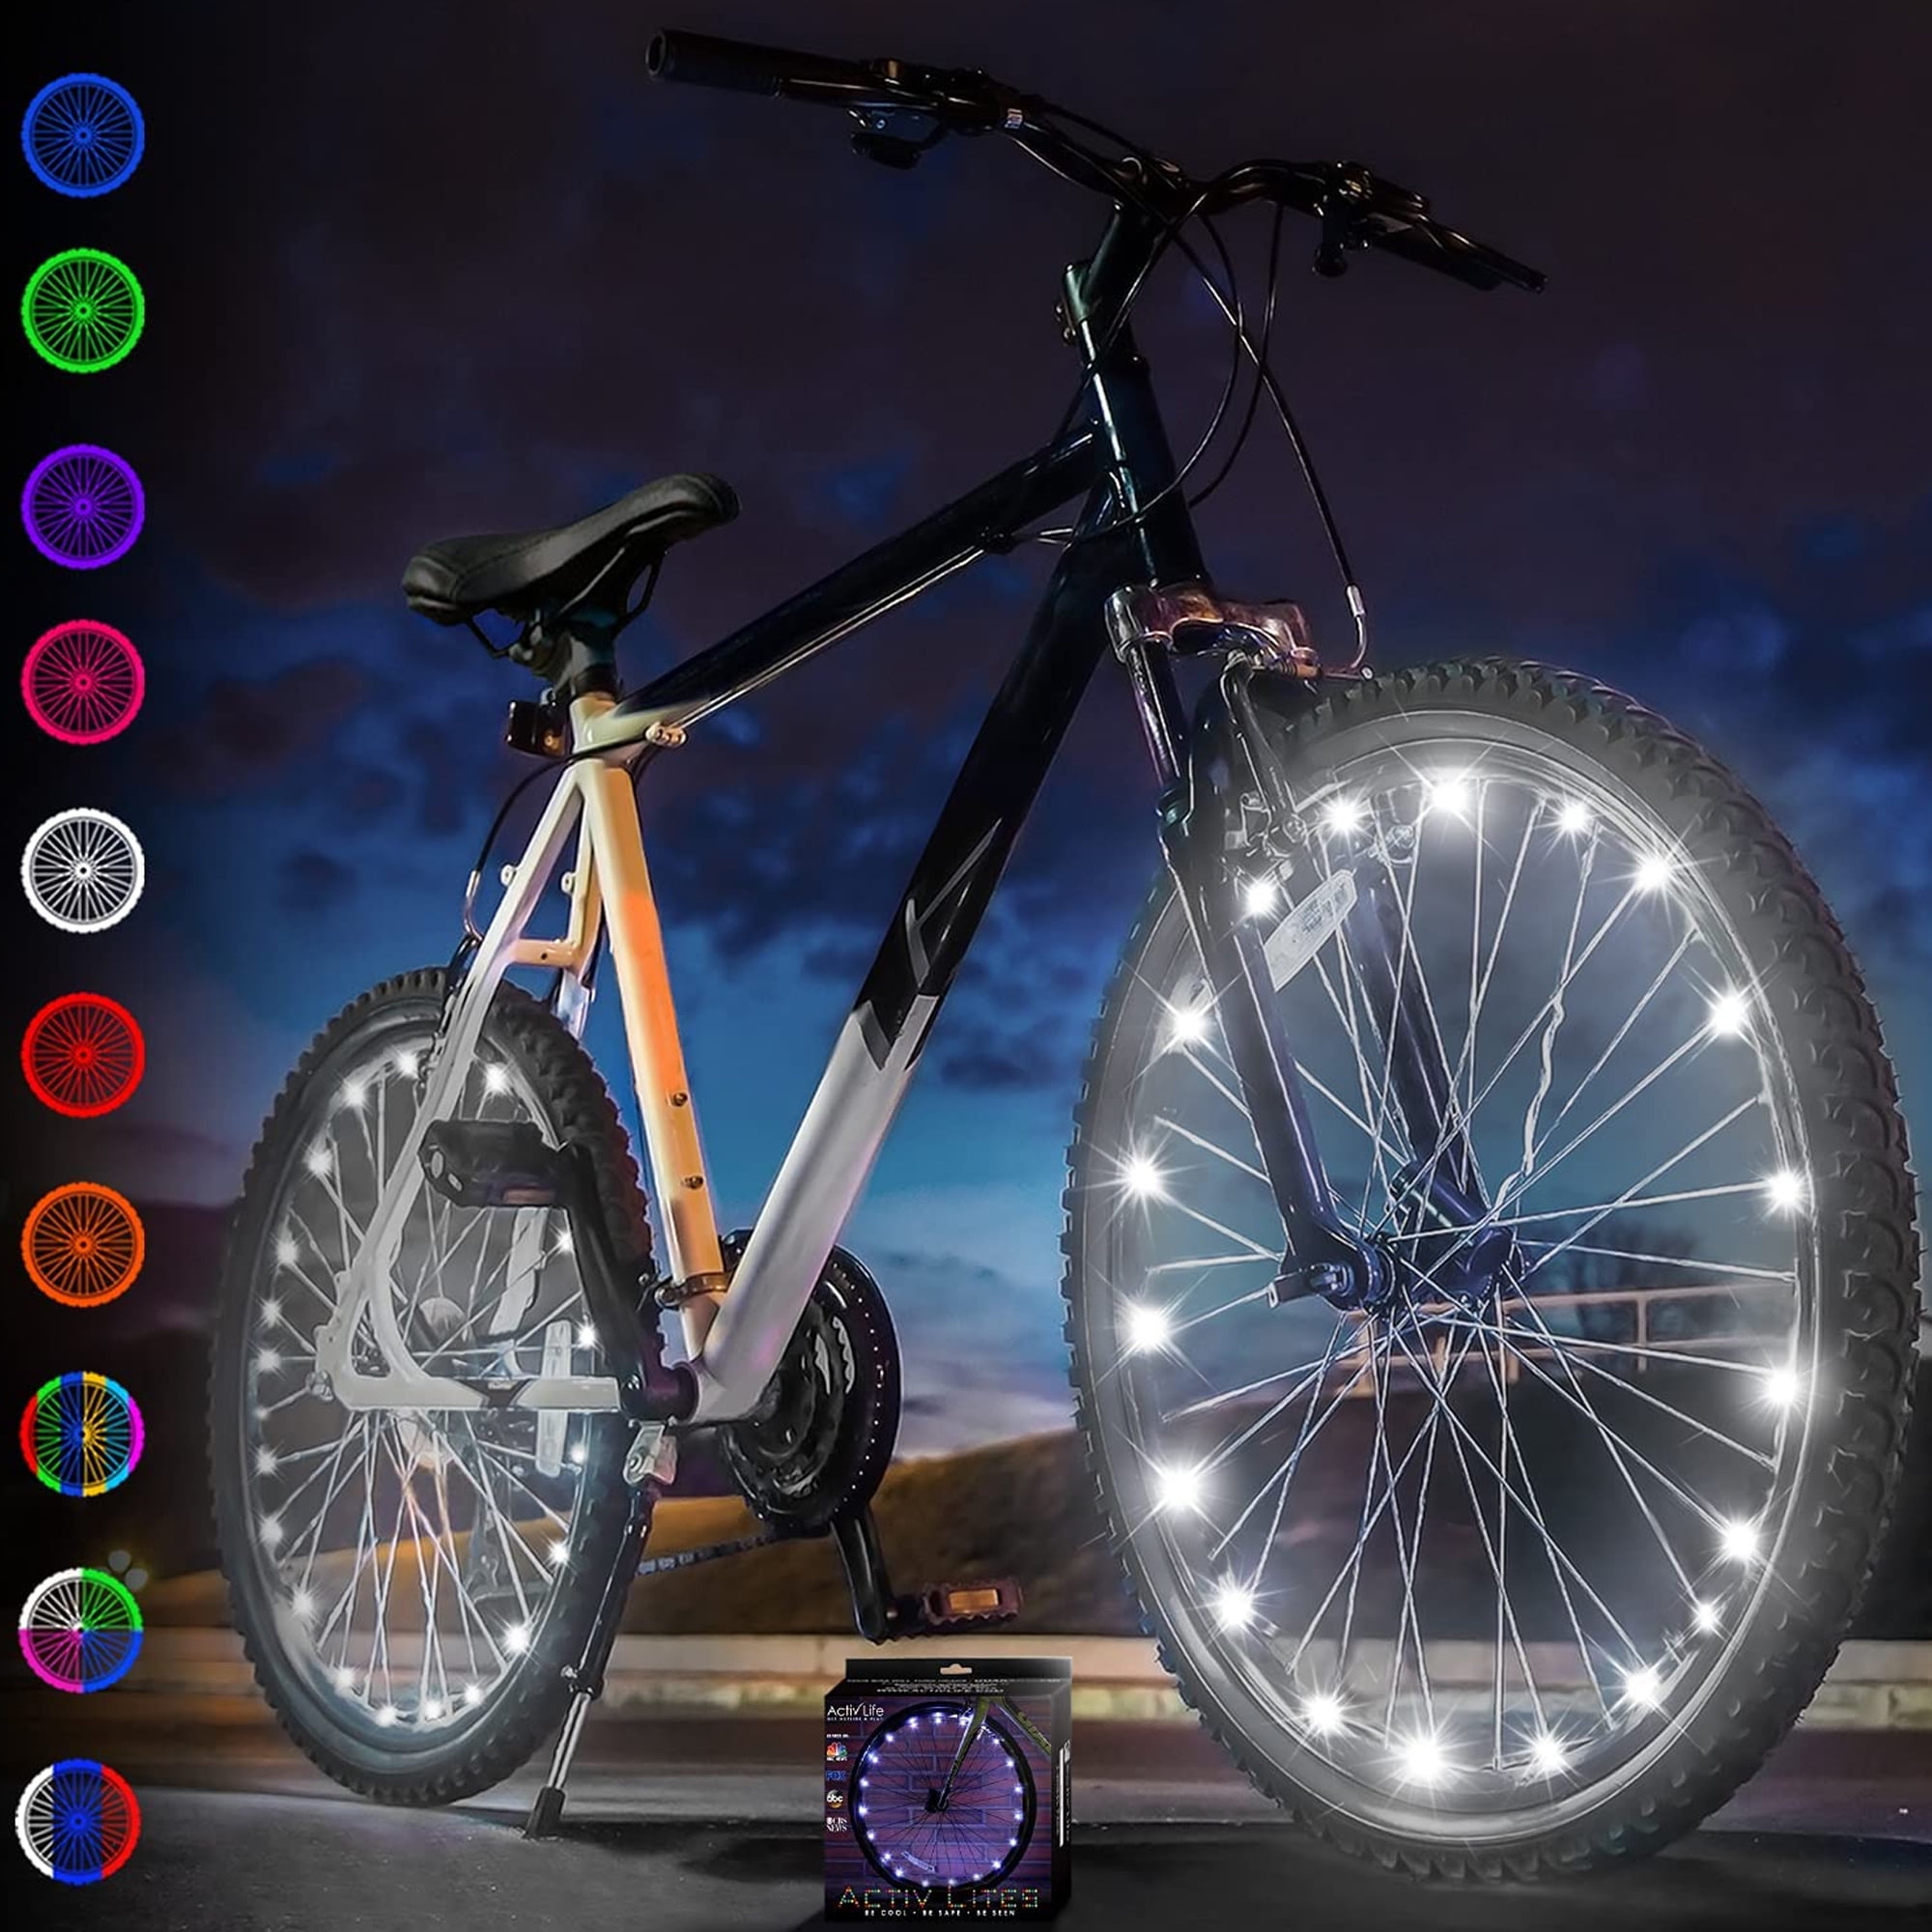 Details about   Bike Front Light Kit Rechargeable USB LED Taillight And Headlight FlashLight 